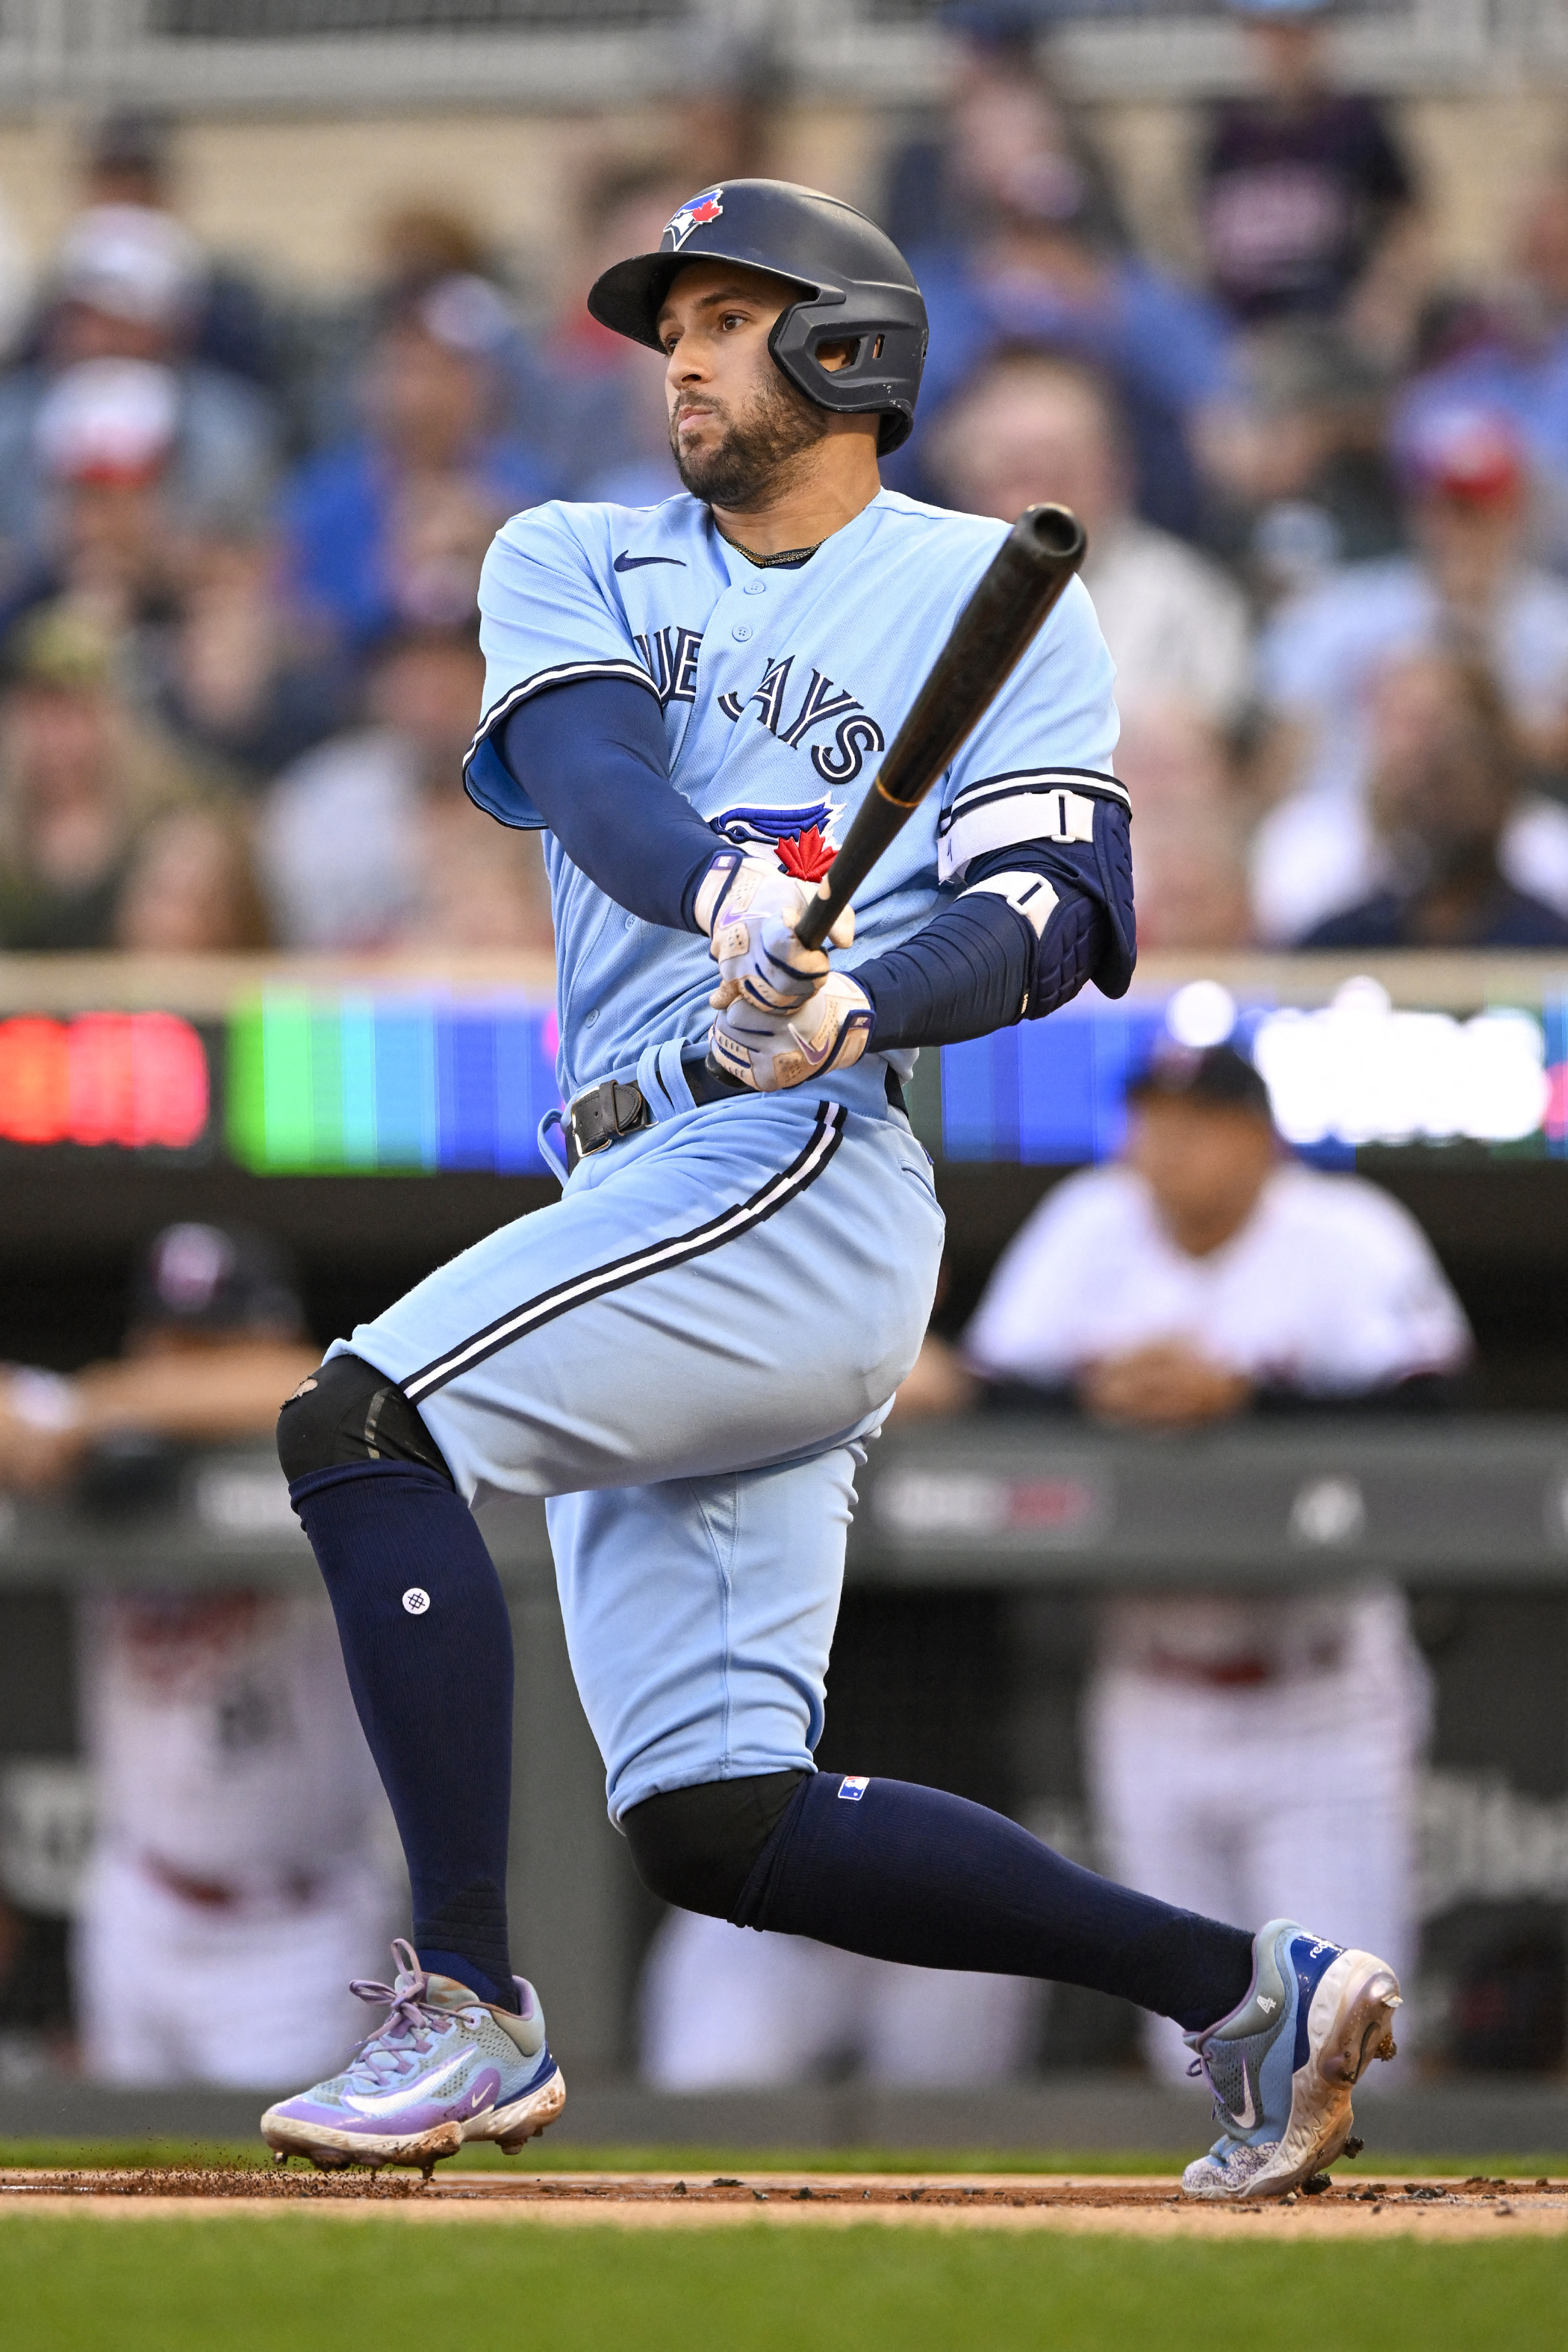 Kevin Kiermaier's two extra-base hits lift Jays past Twins